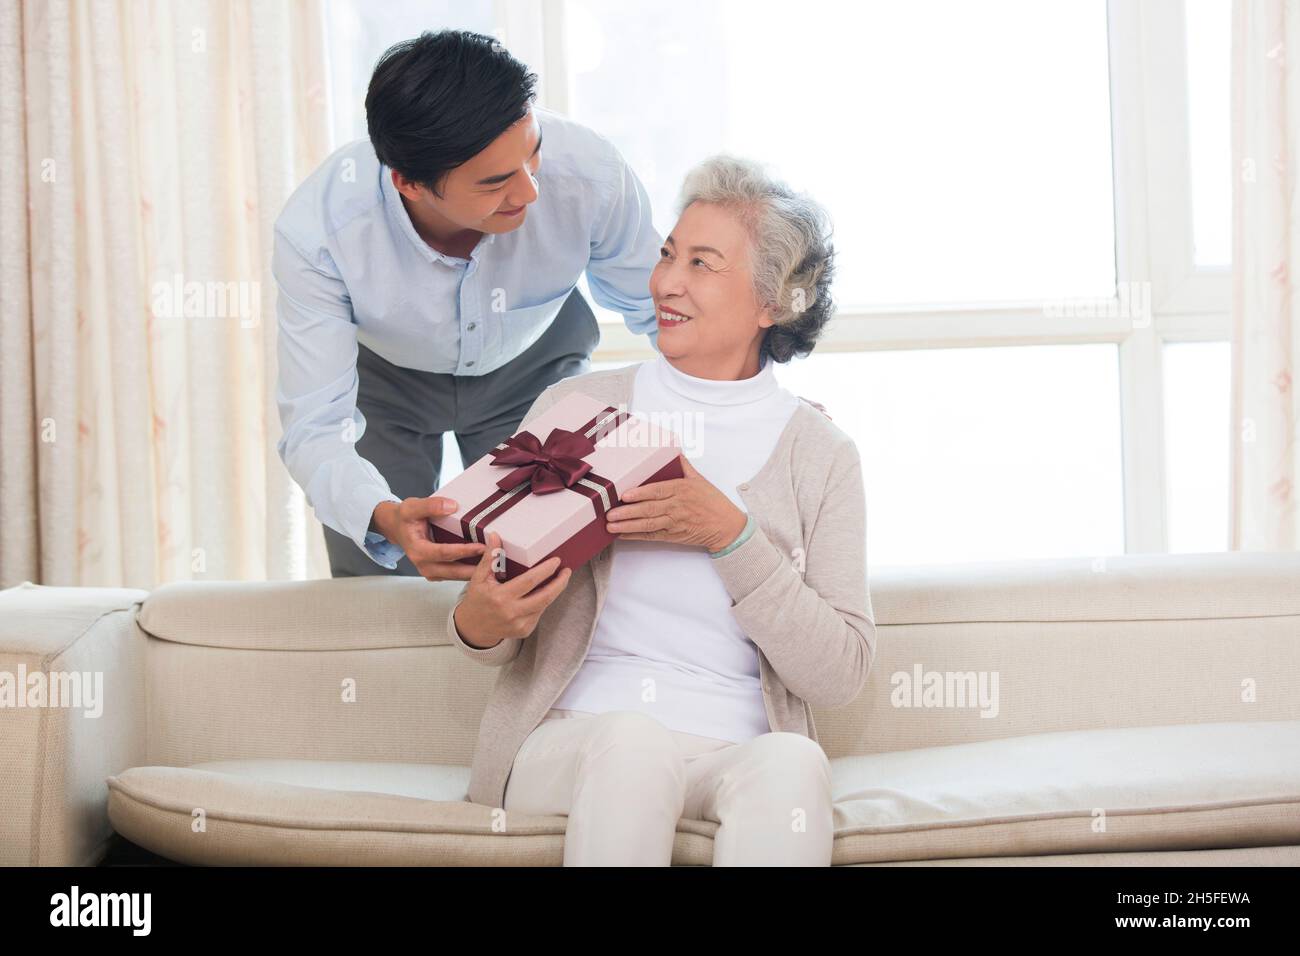 Happy mother and son and presents Stock Photo